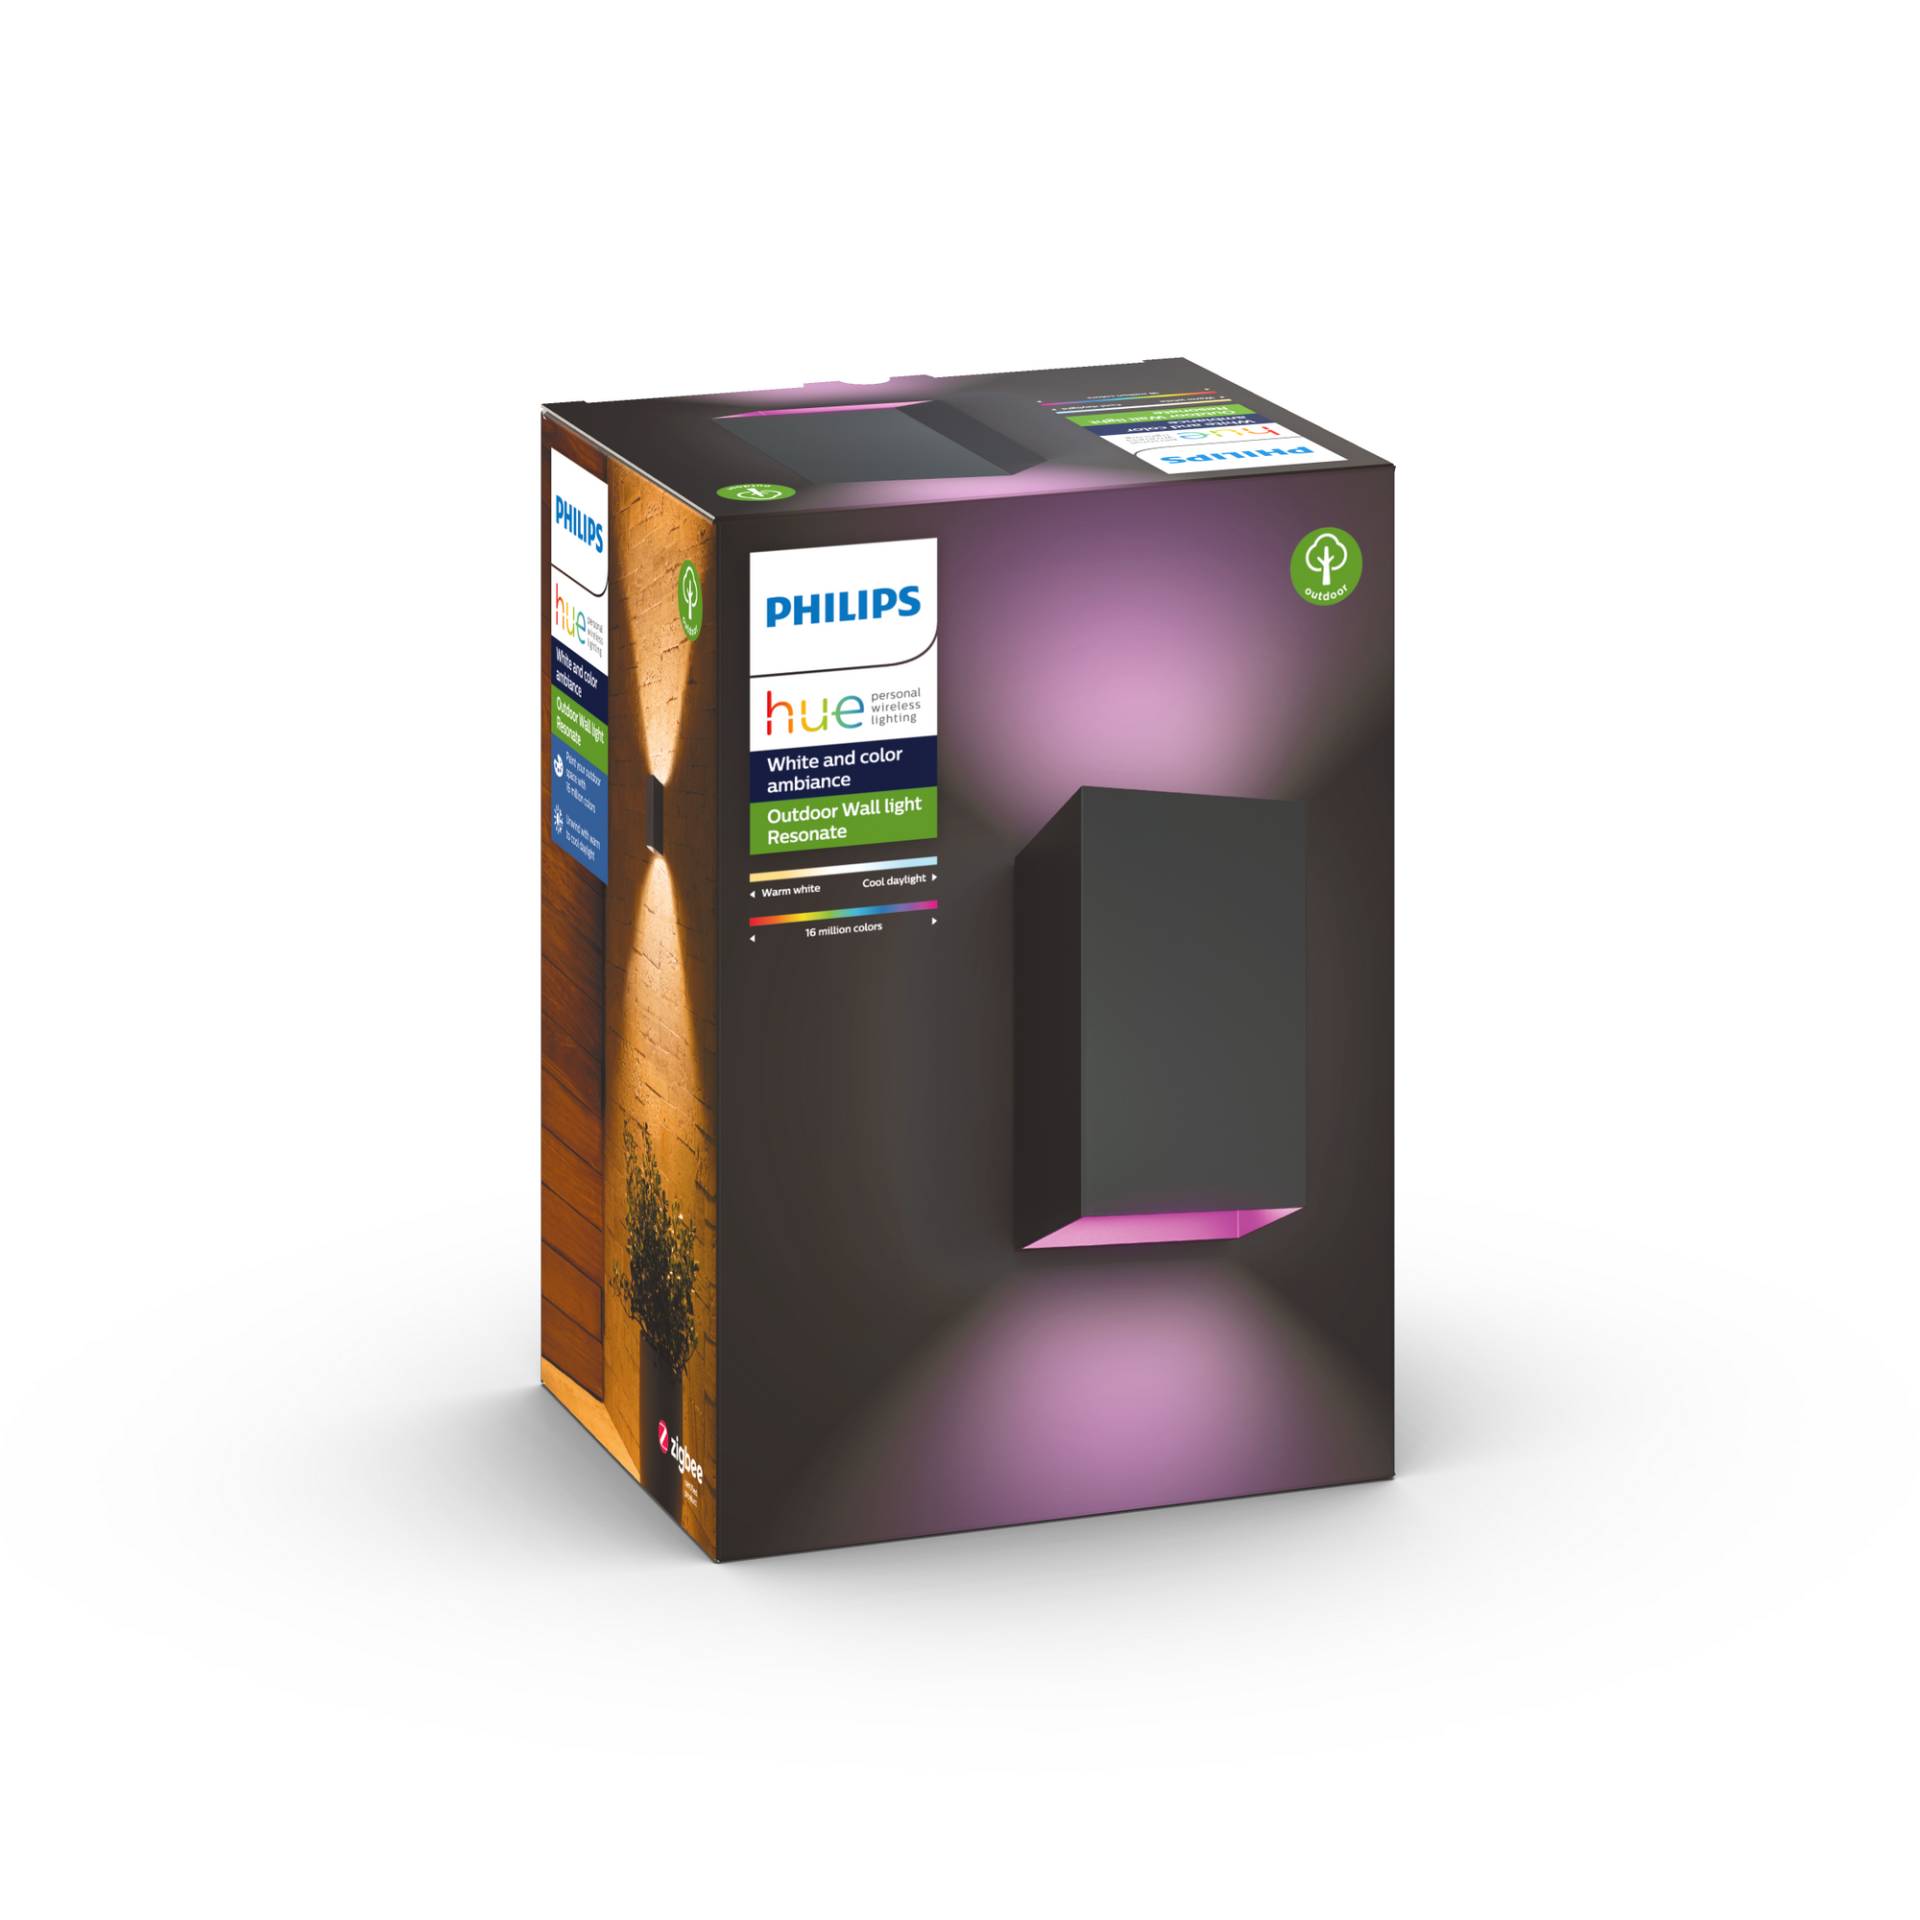 Philips Hue LED-Wandleuchte 'Hue White & Color Ambiance Resonate' schwarz 1200 lm von Philips Hue